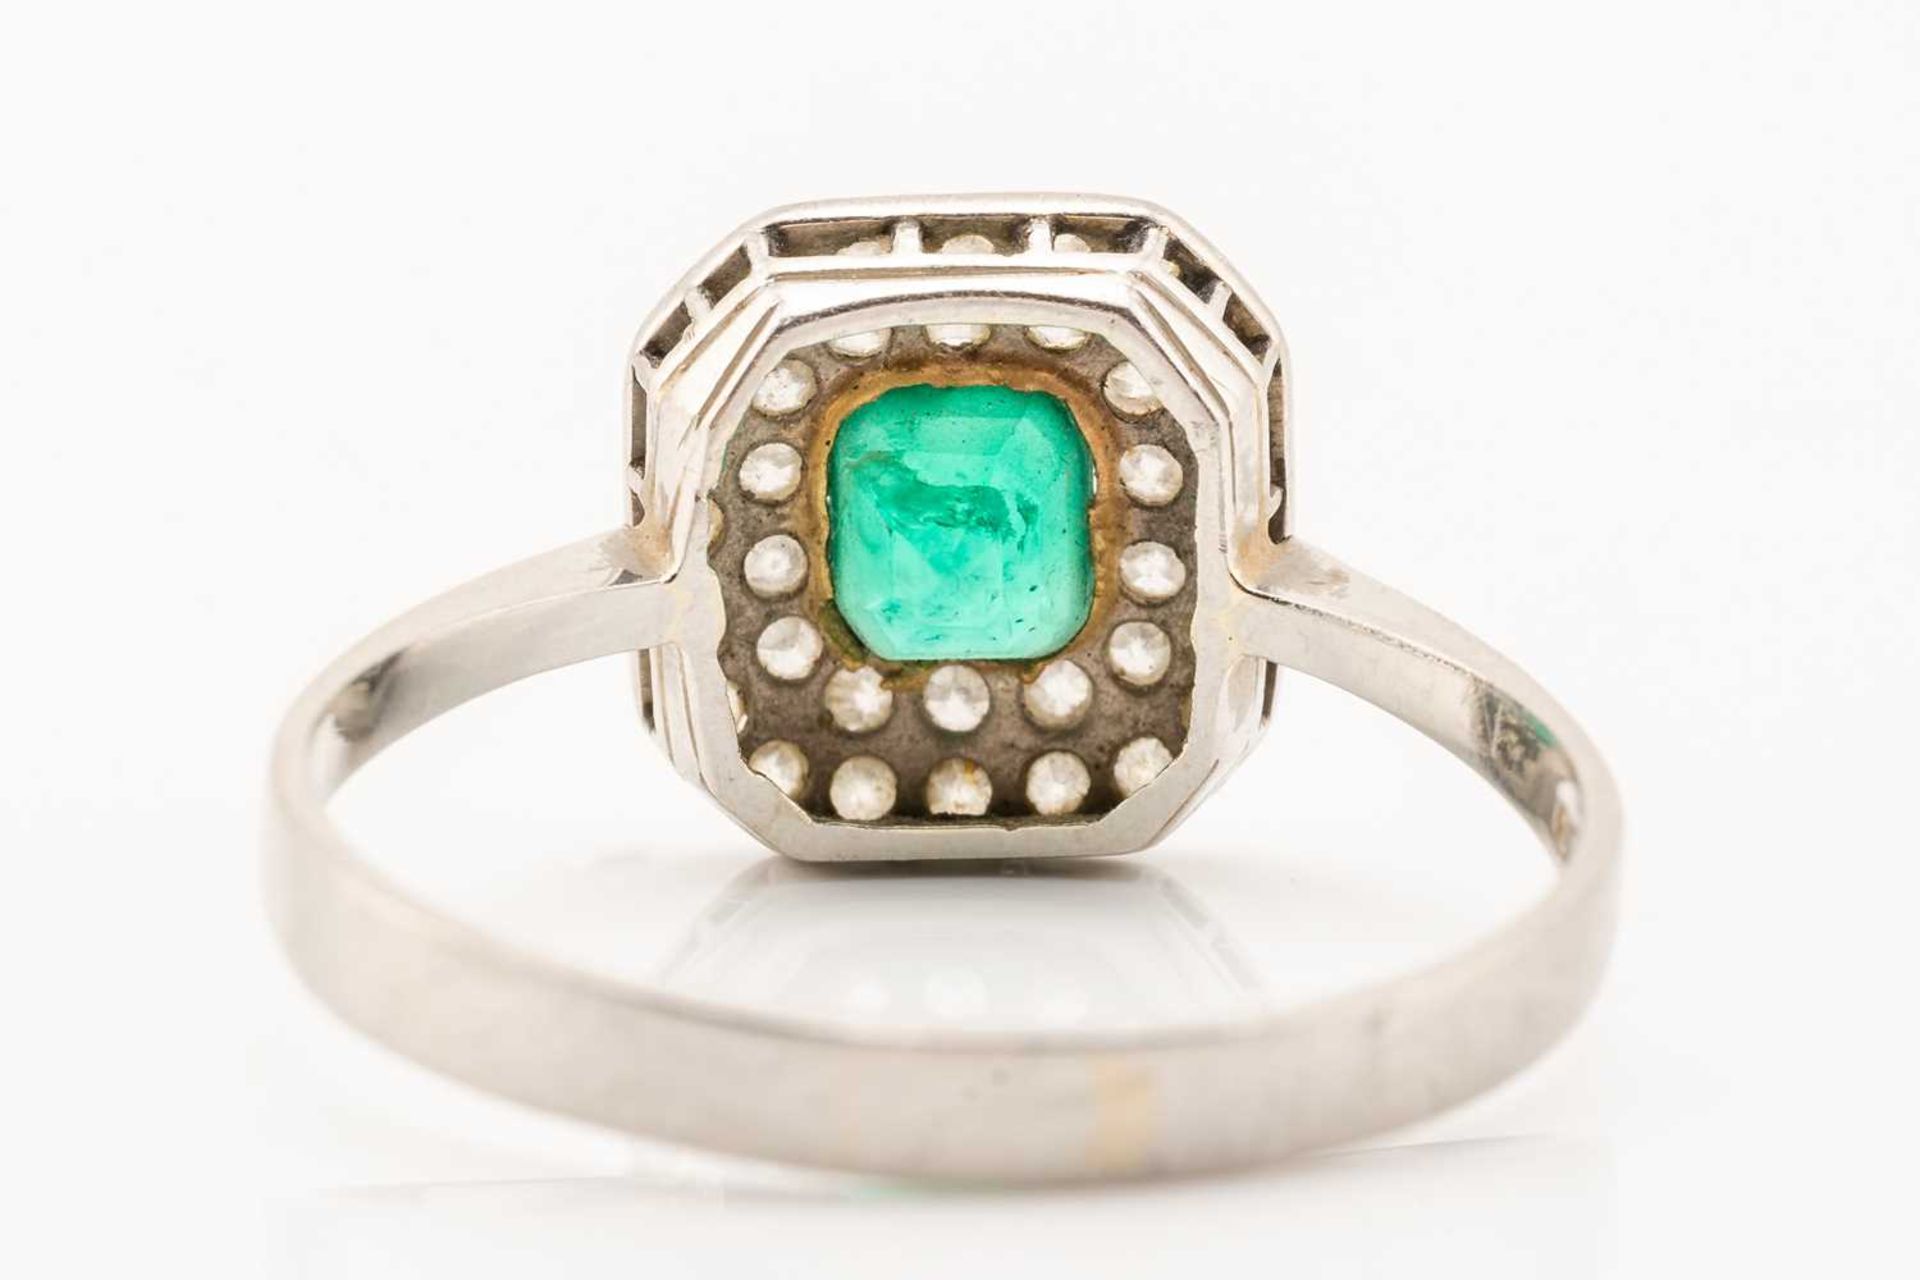 An emerald and diamond cluster ring in platinum, centred with an emerald-cut emerald of bright green - Image 3 of 5